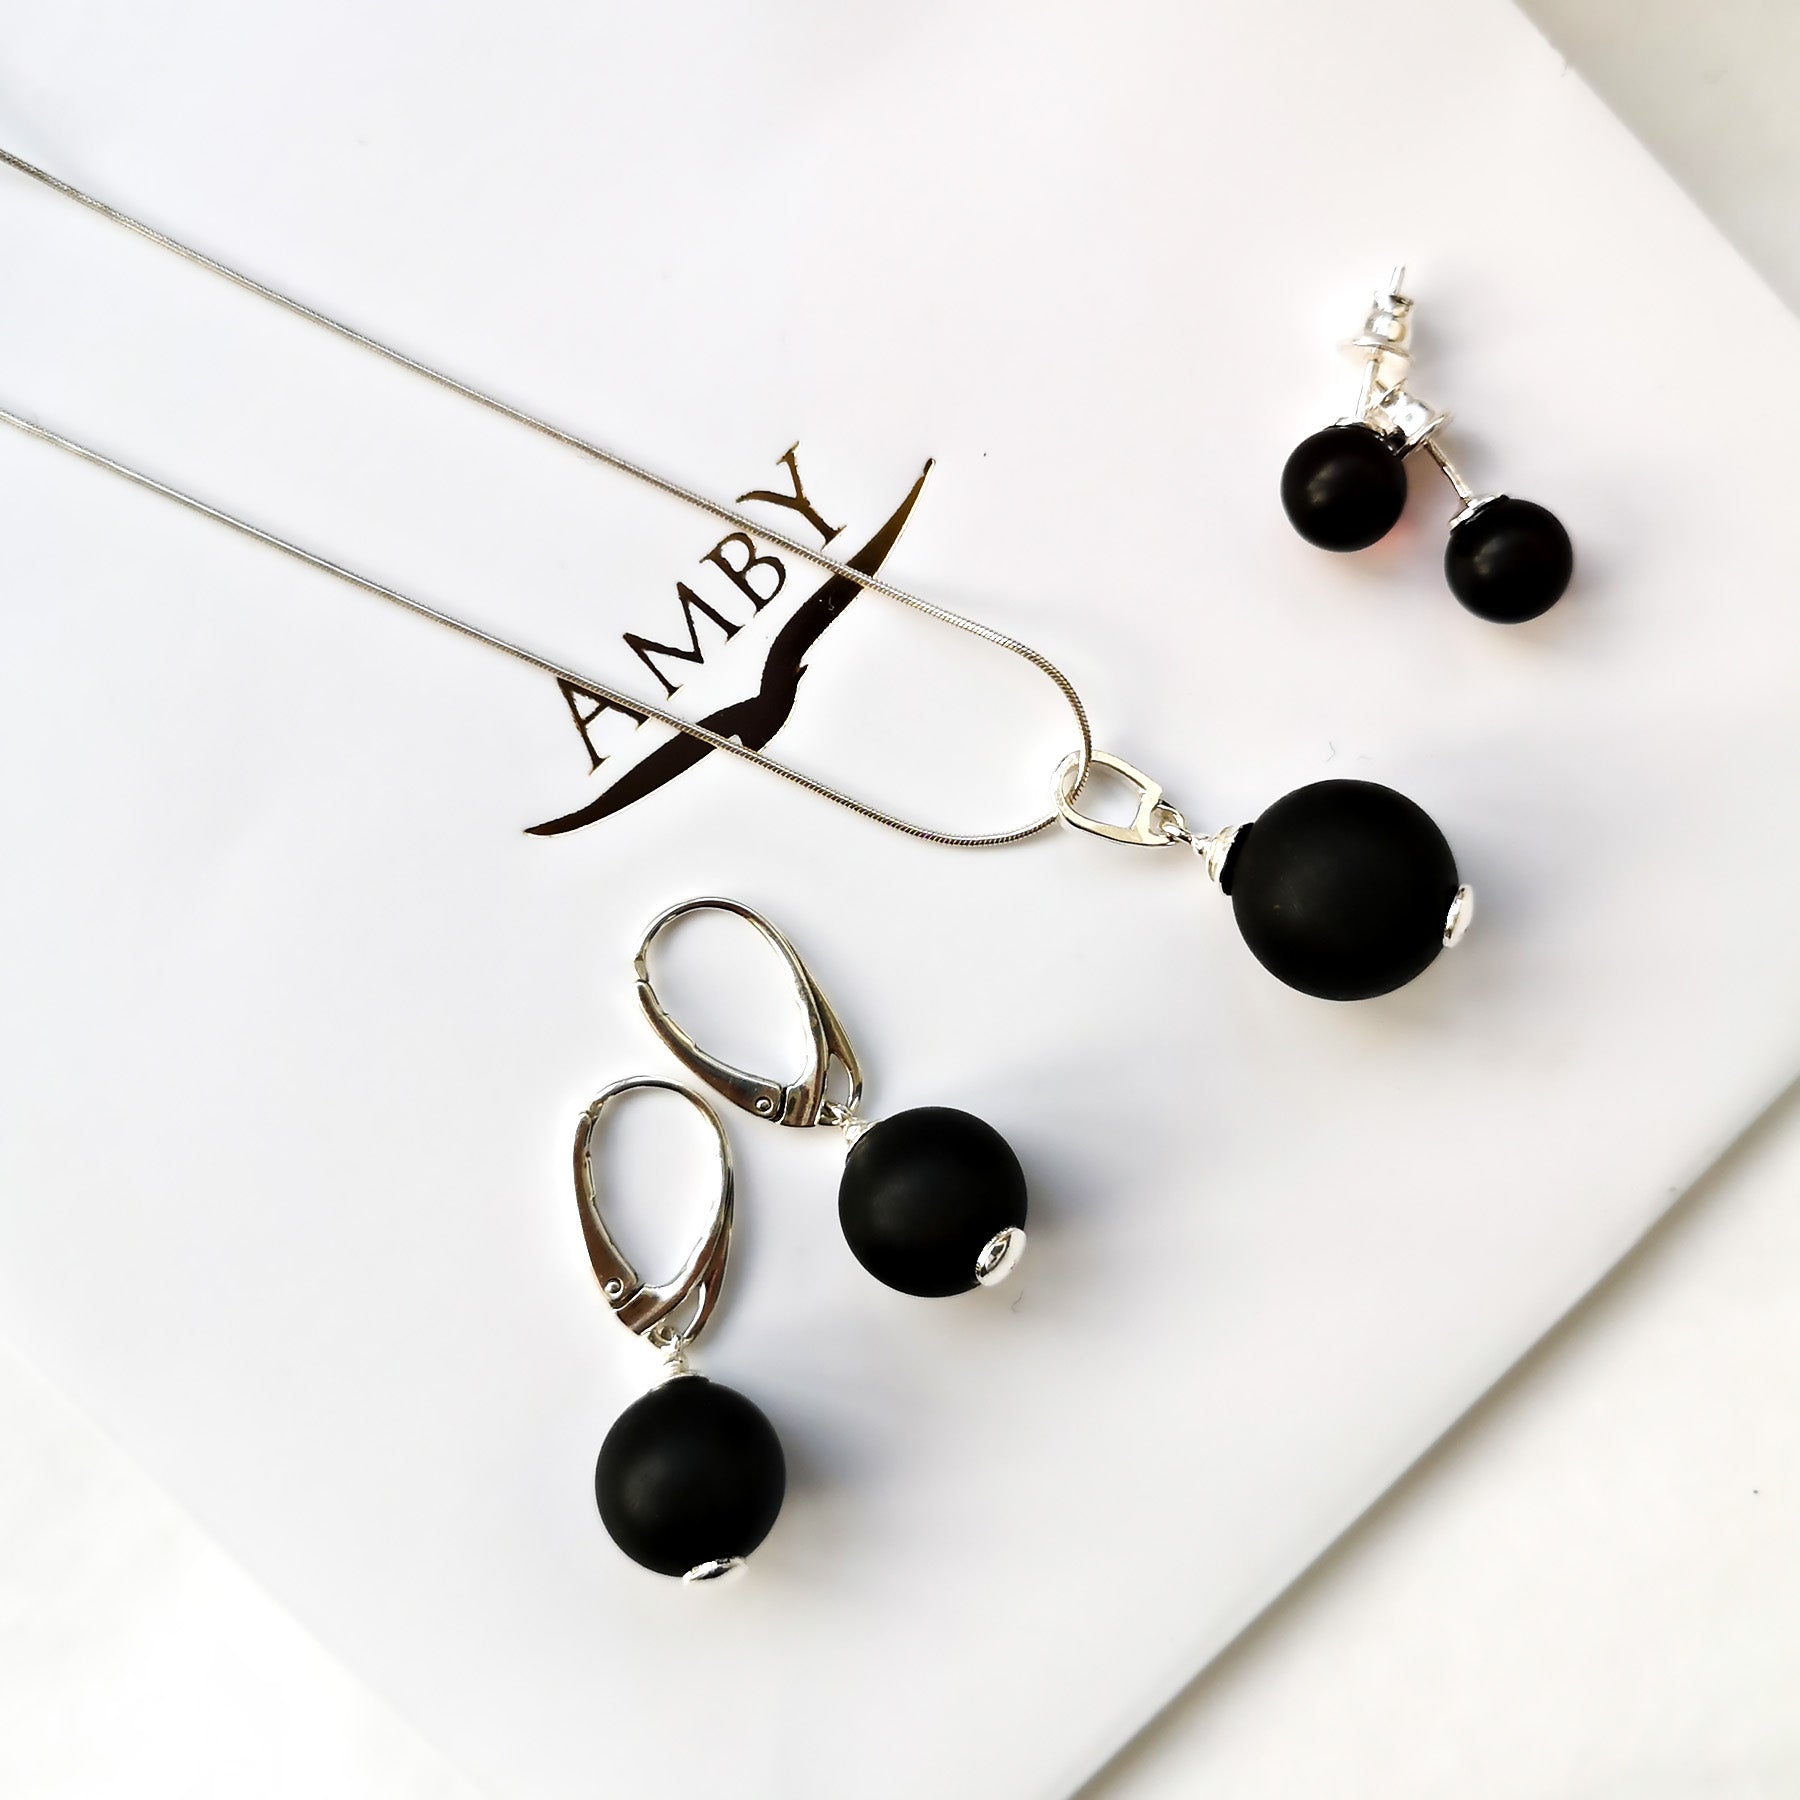 Black amber set with silver 925 "Bellum silver"